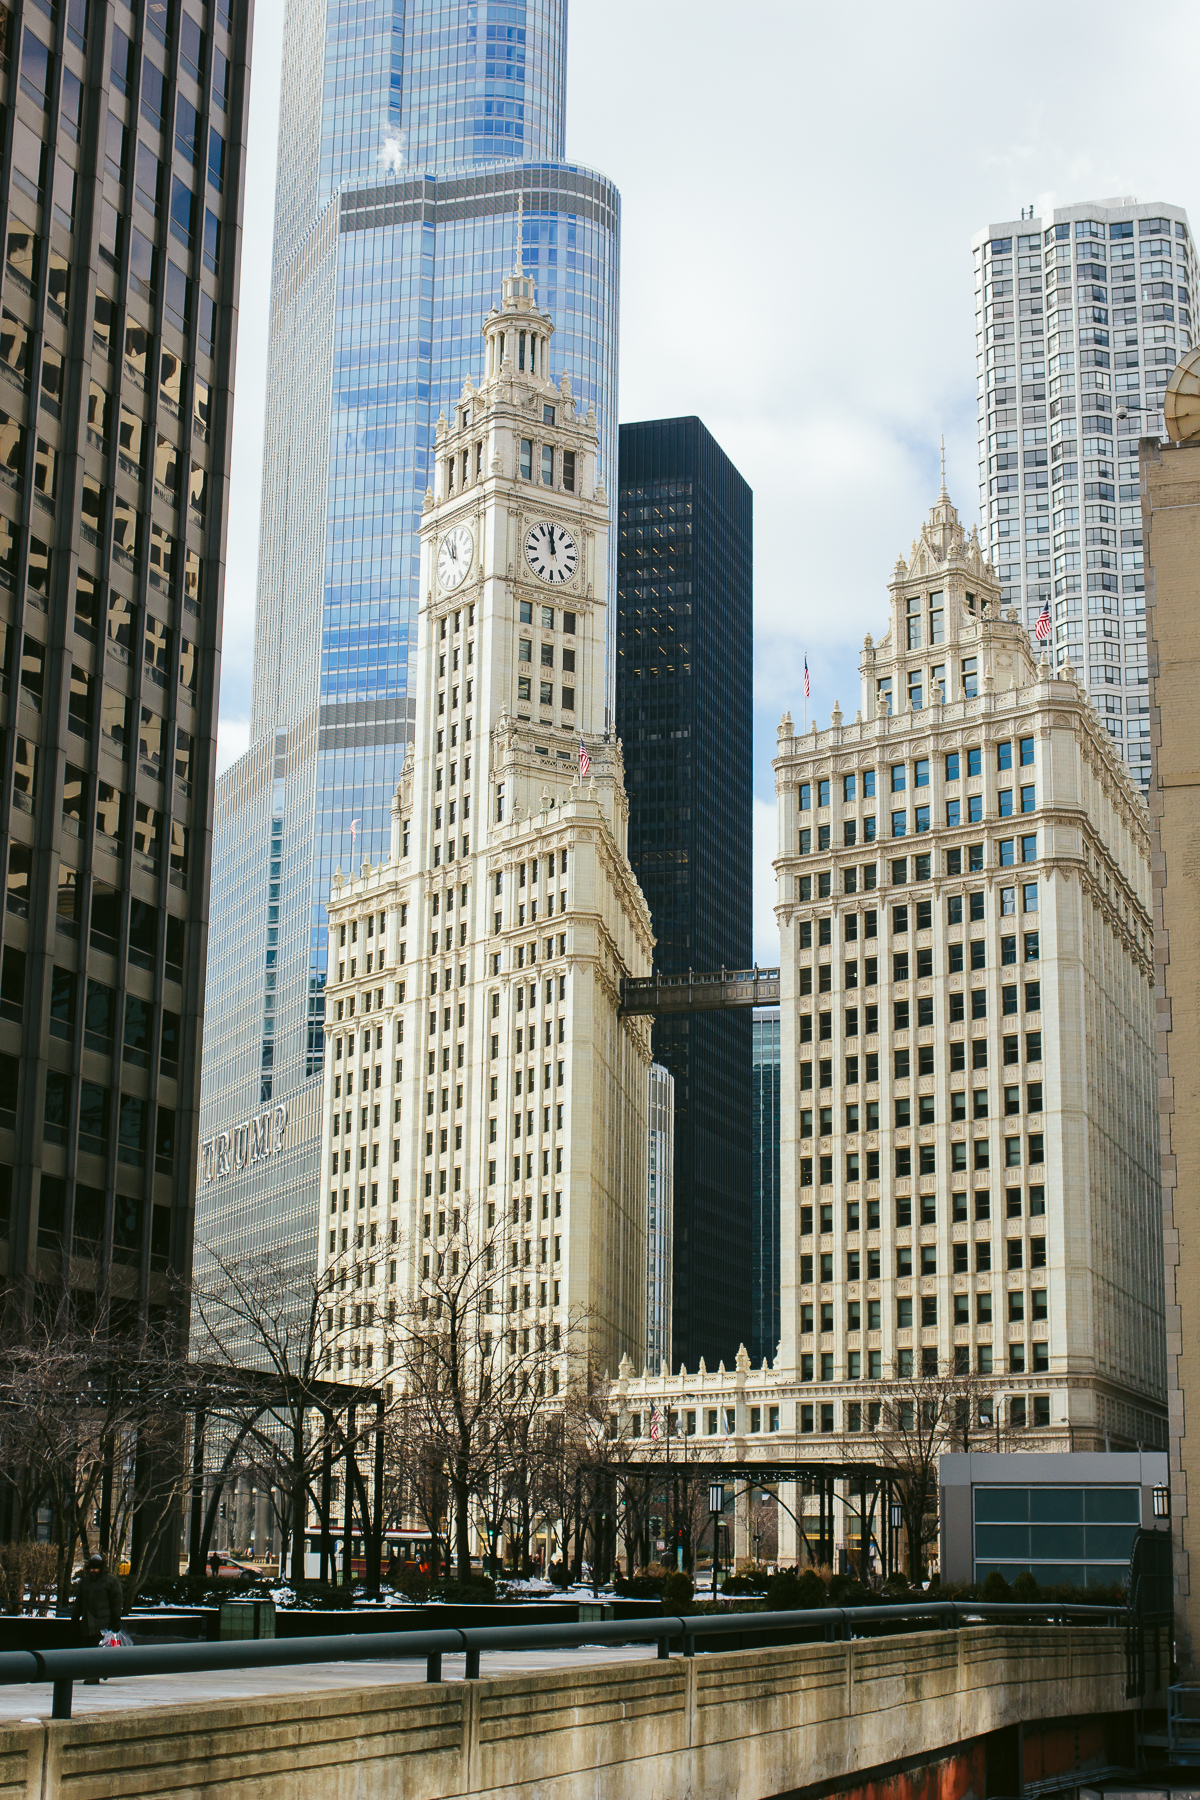 magnificent mile, michigan ave, wrigley building, chicago travel — via @TheFoxandShe